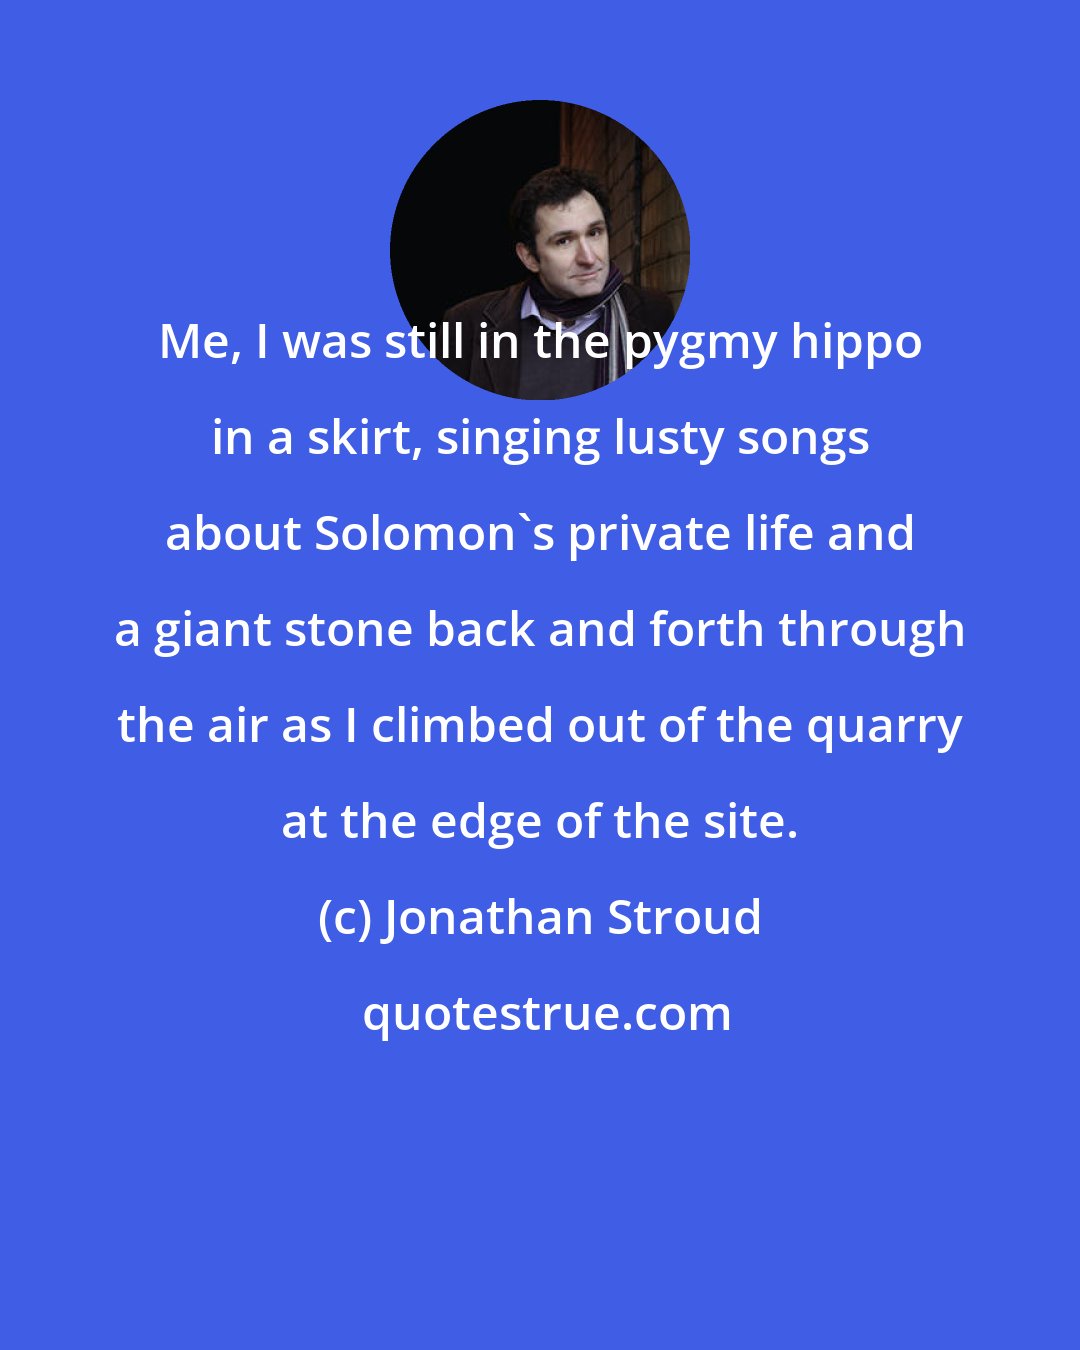 Jonathan Stroud: Me, I was still in the pygmy hippo in a skirt, singing lusty songs about Solomon's private life and a giant stone back and forth through the air as I climbed out of the quarry at the edge of the site.